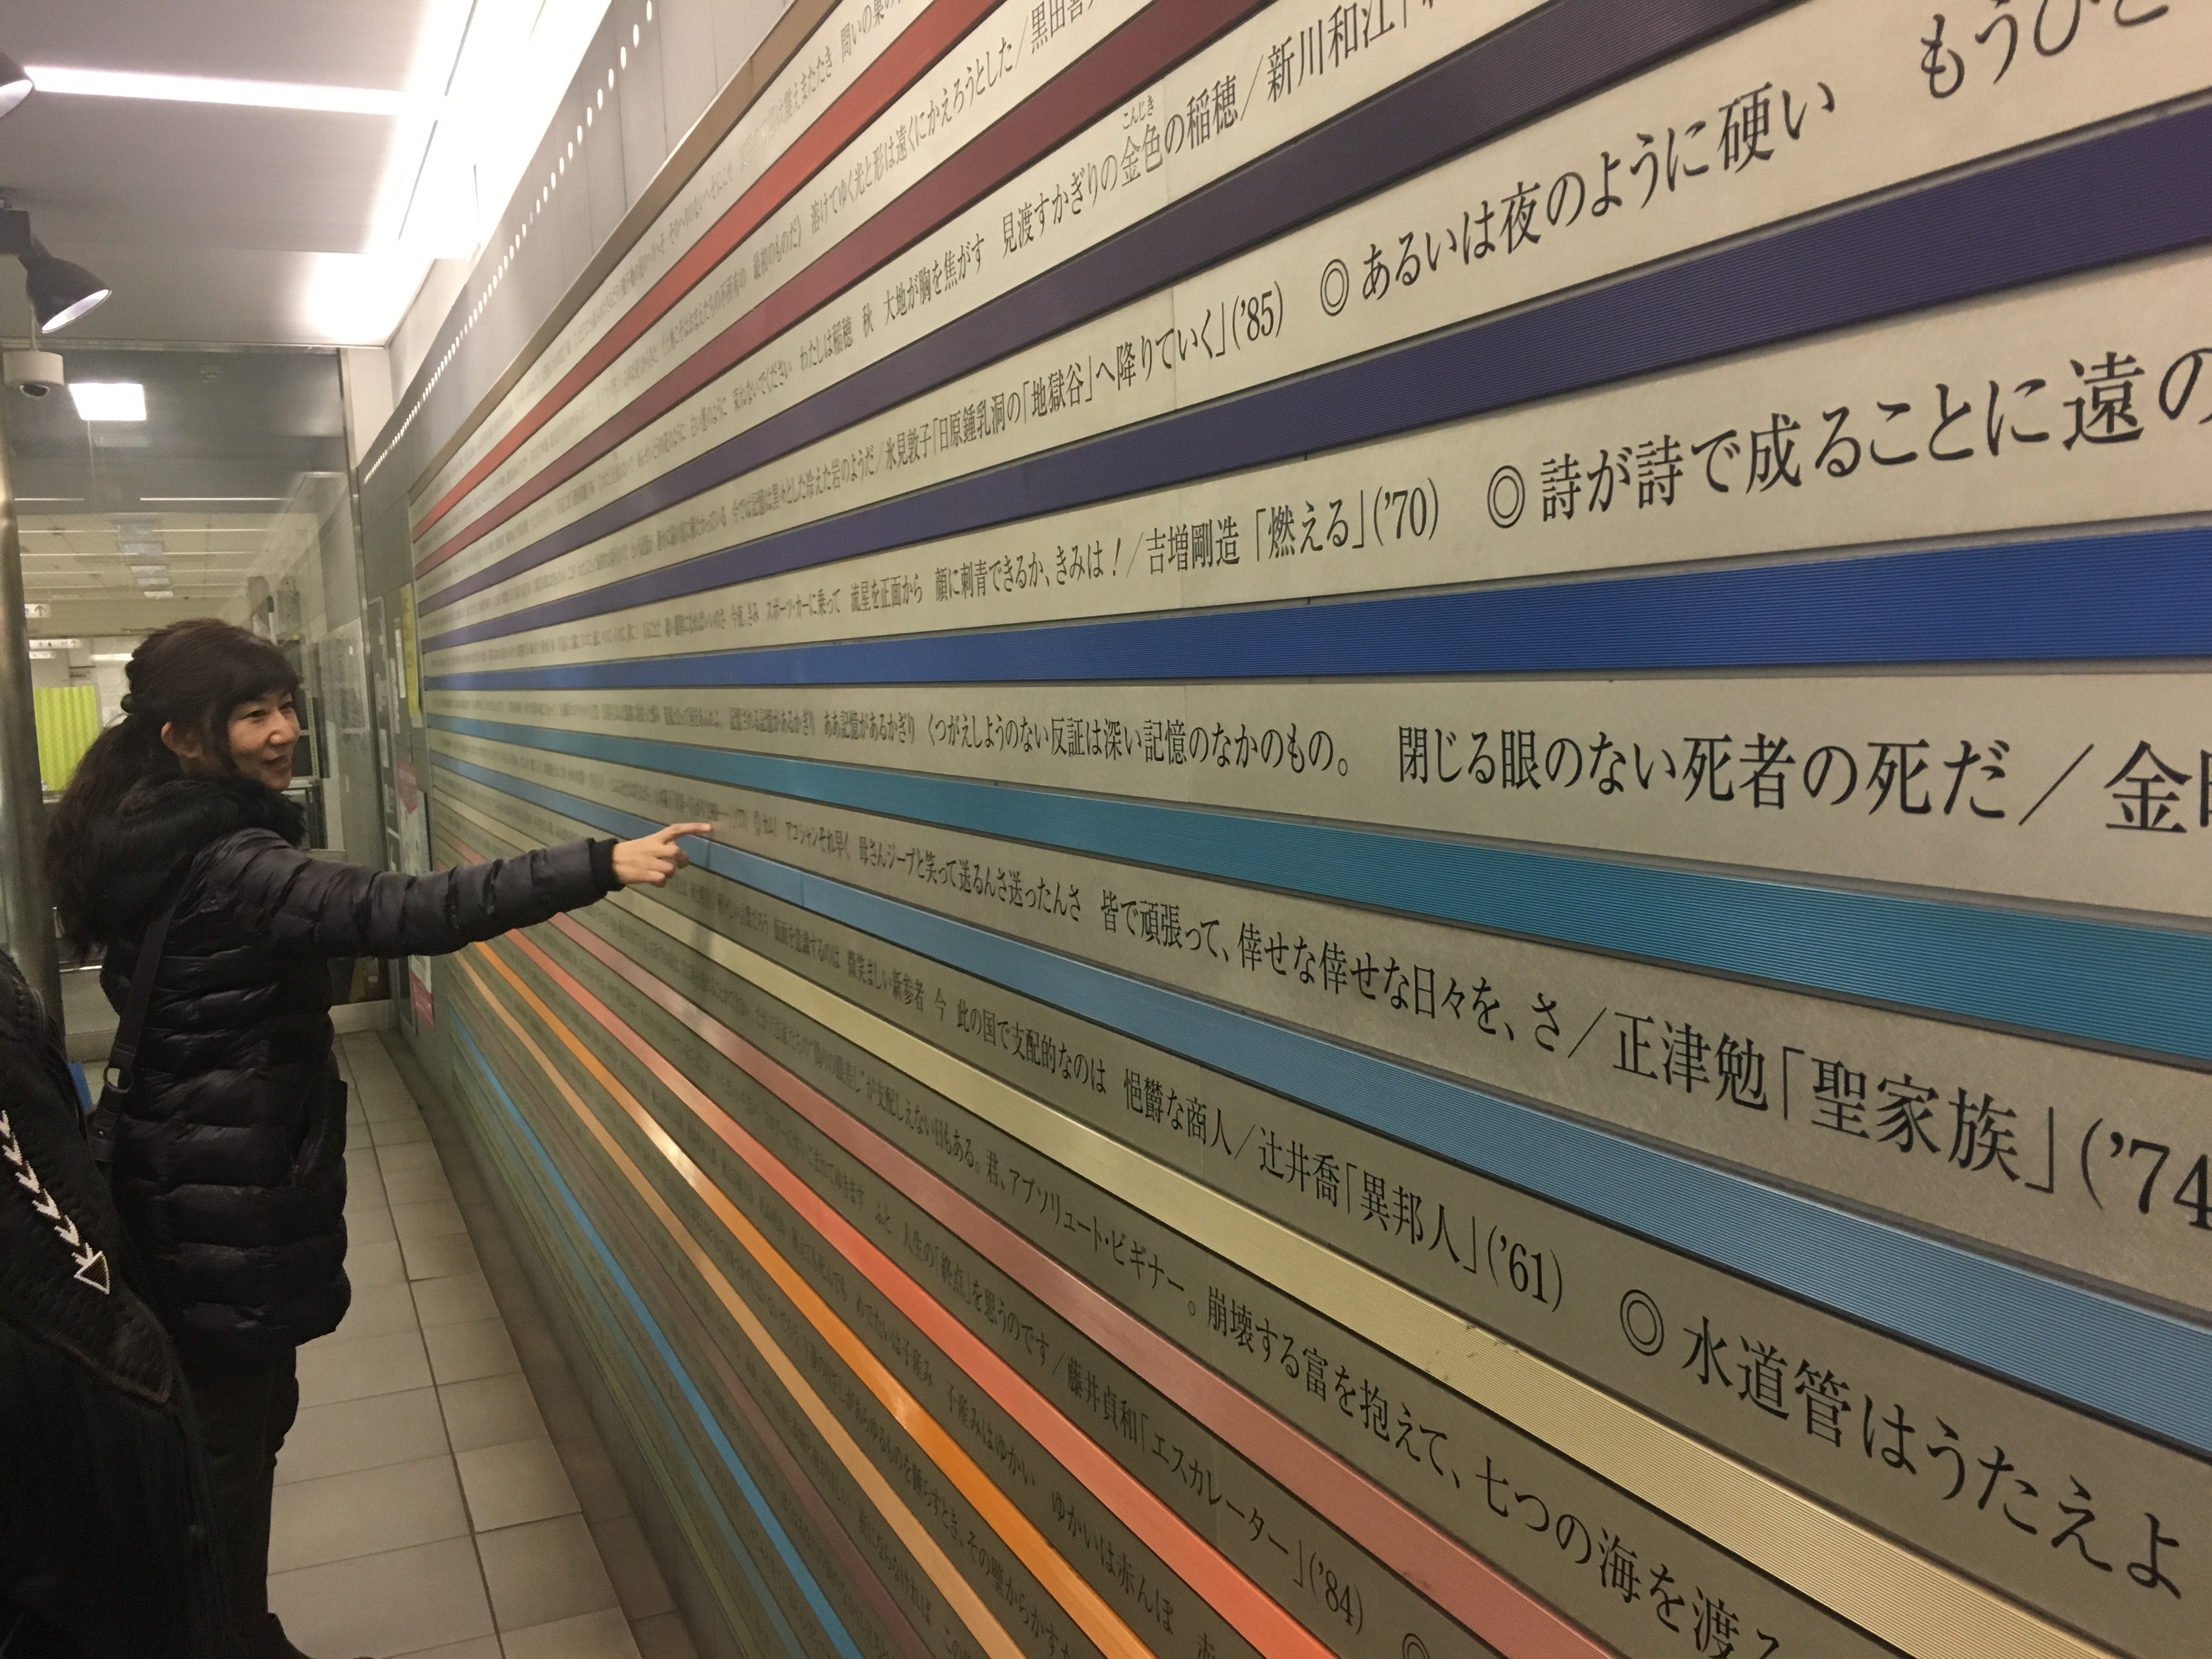 Professor Kazuyo Kubo looks at poetry printed on the walls of a subway station. Between each line is a band of color.